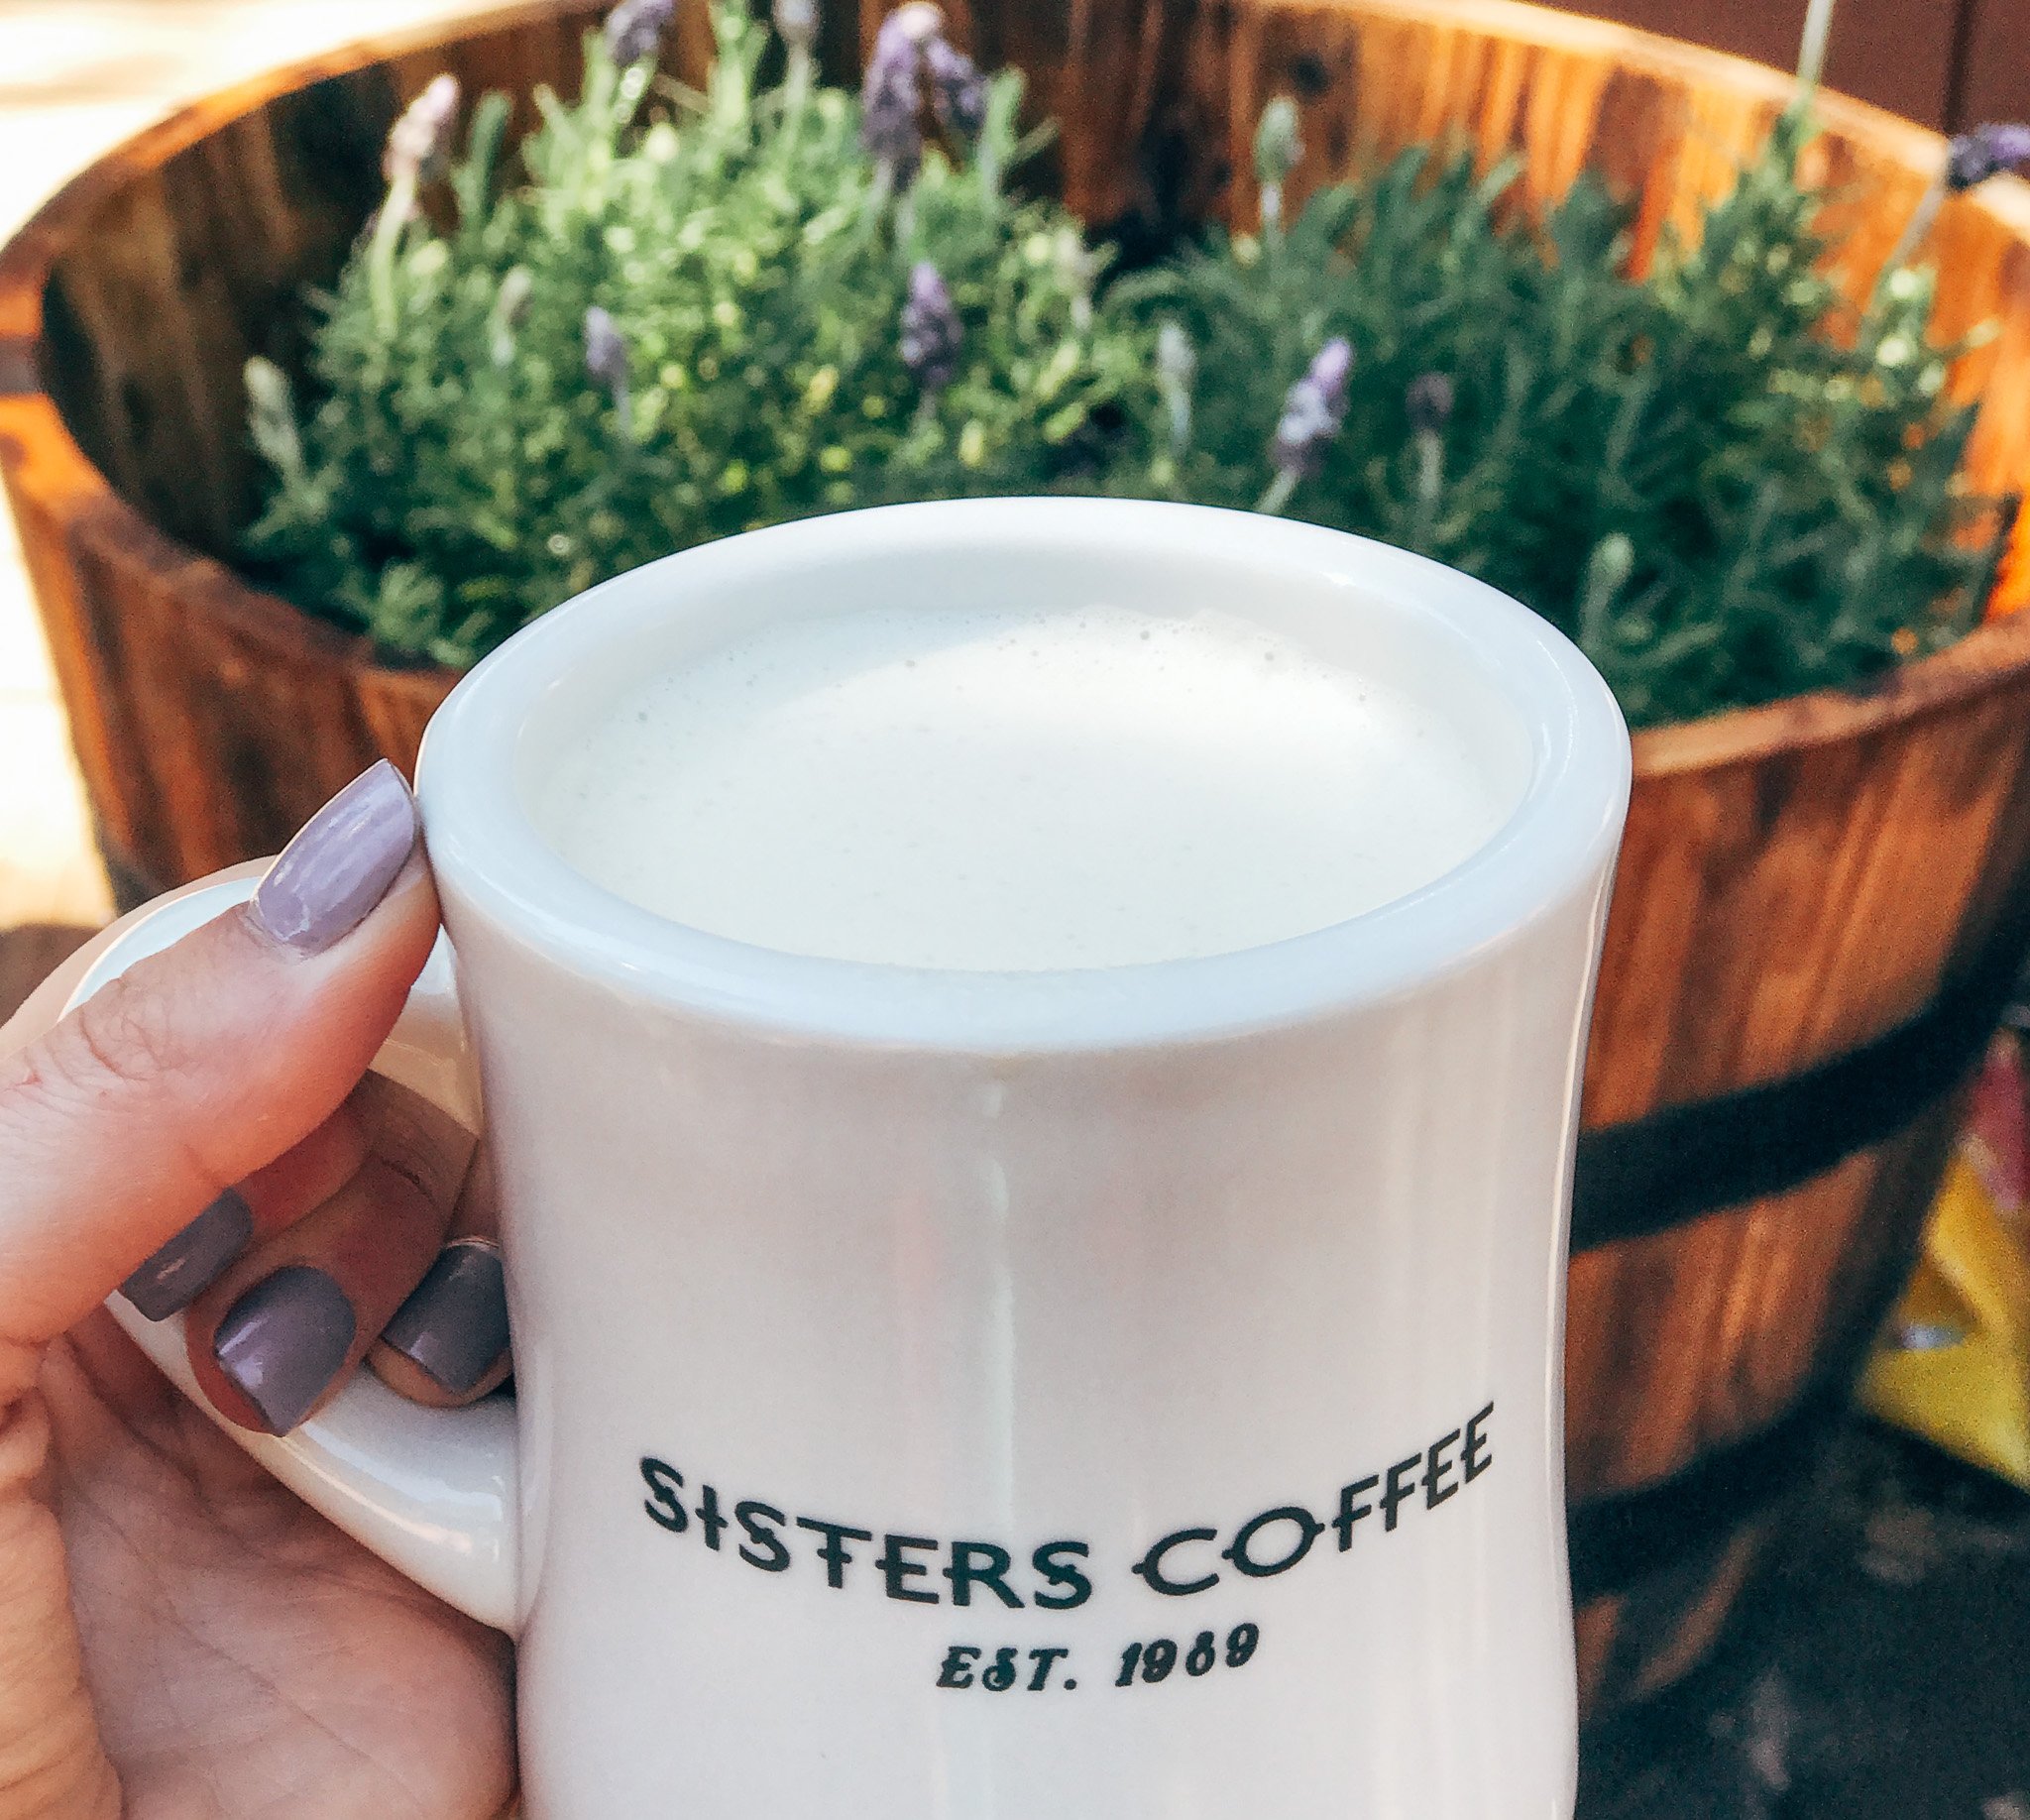 Cup of coffee reads Sisters Coffee established 1989